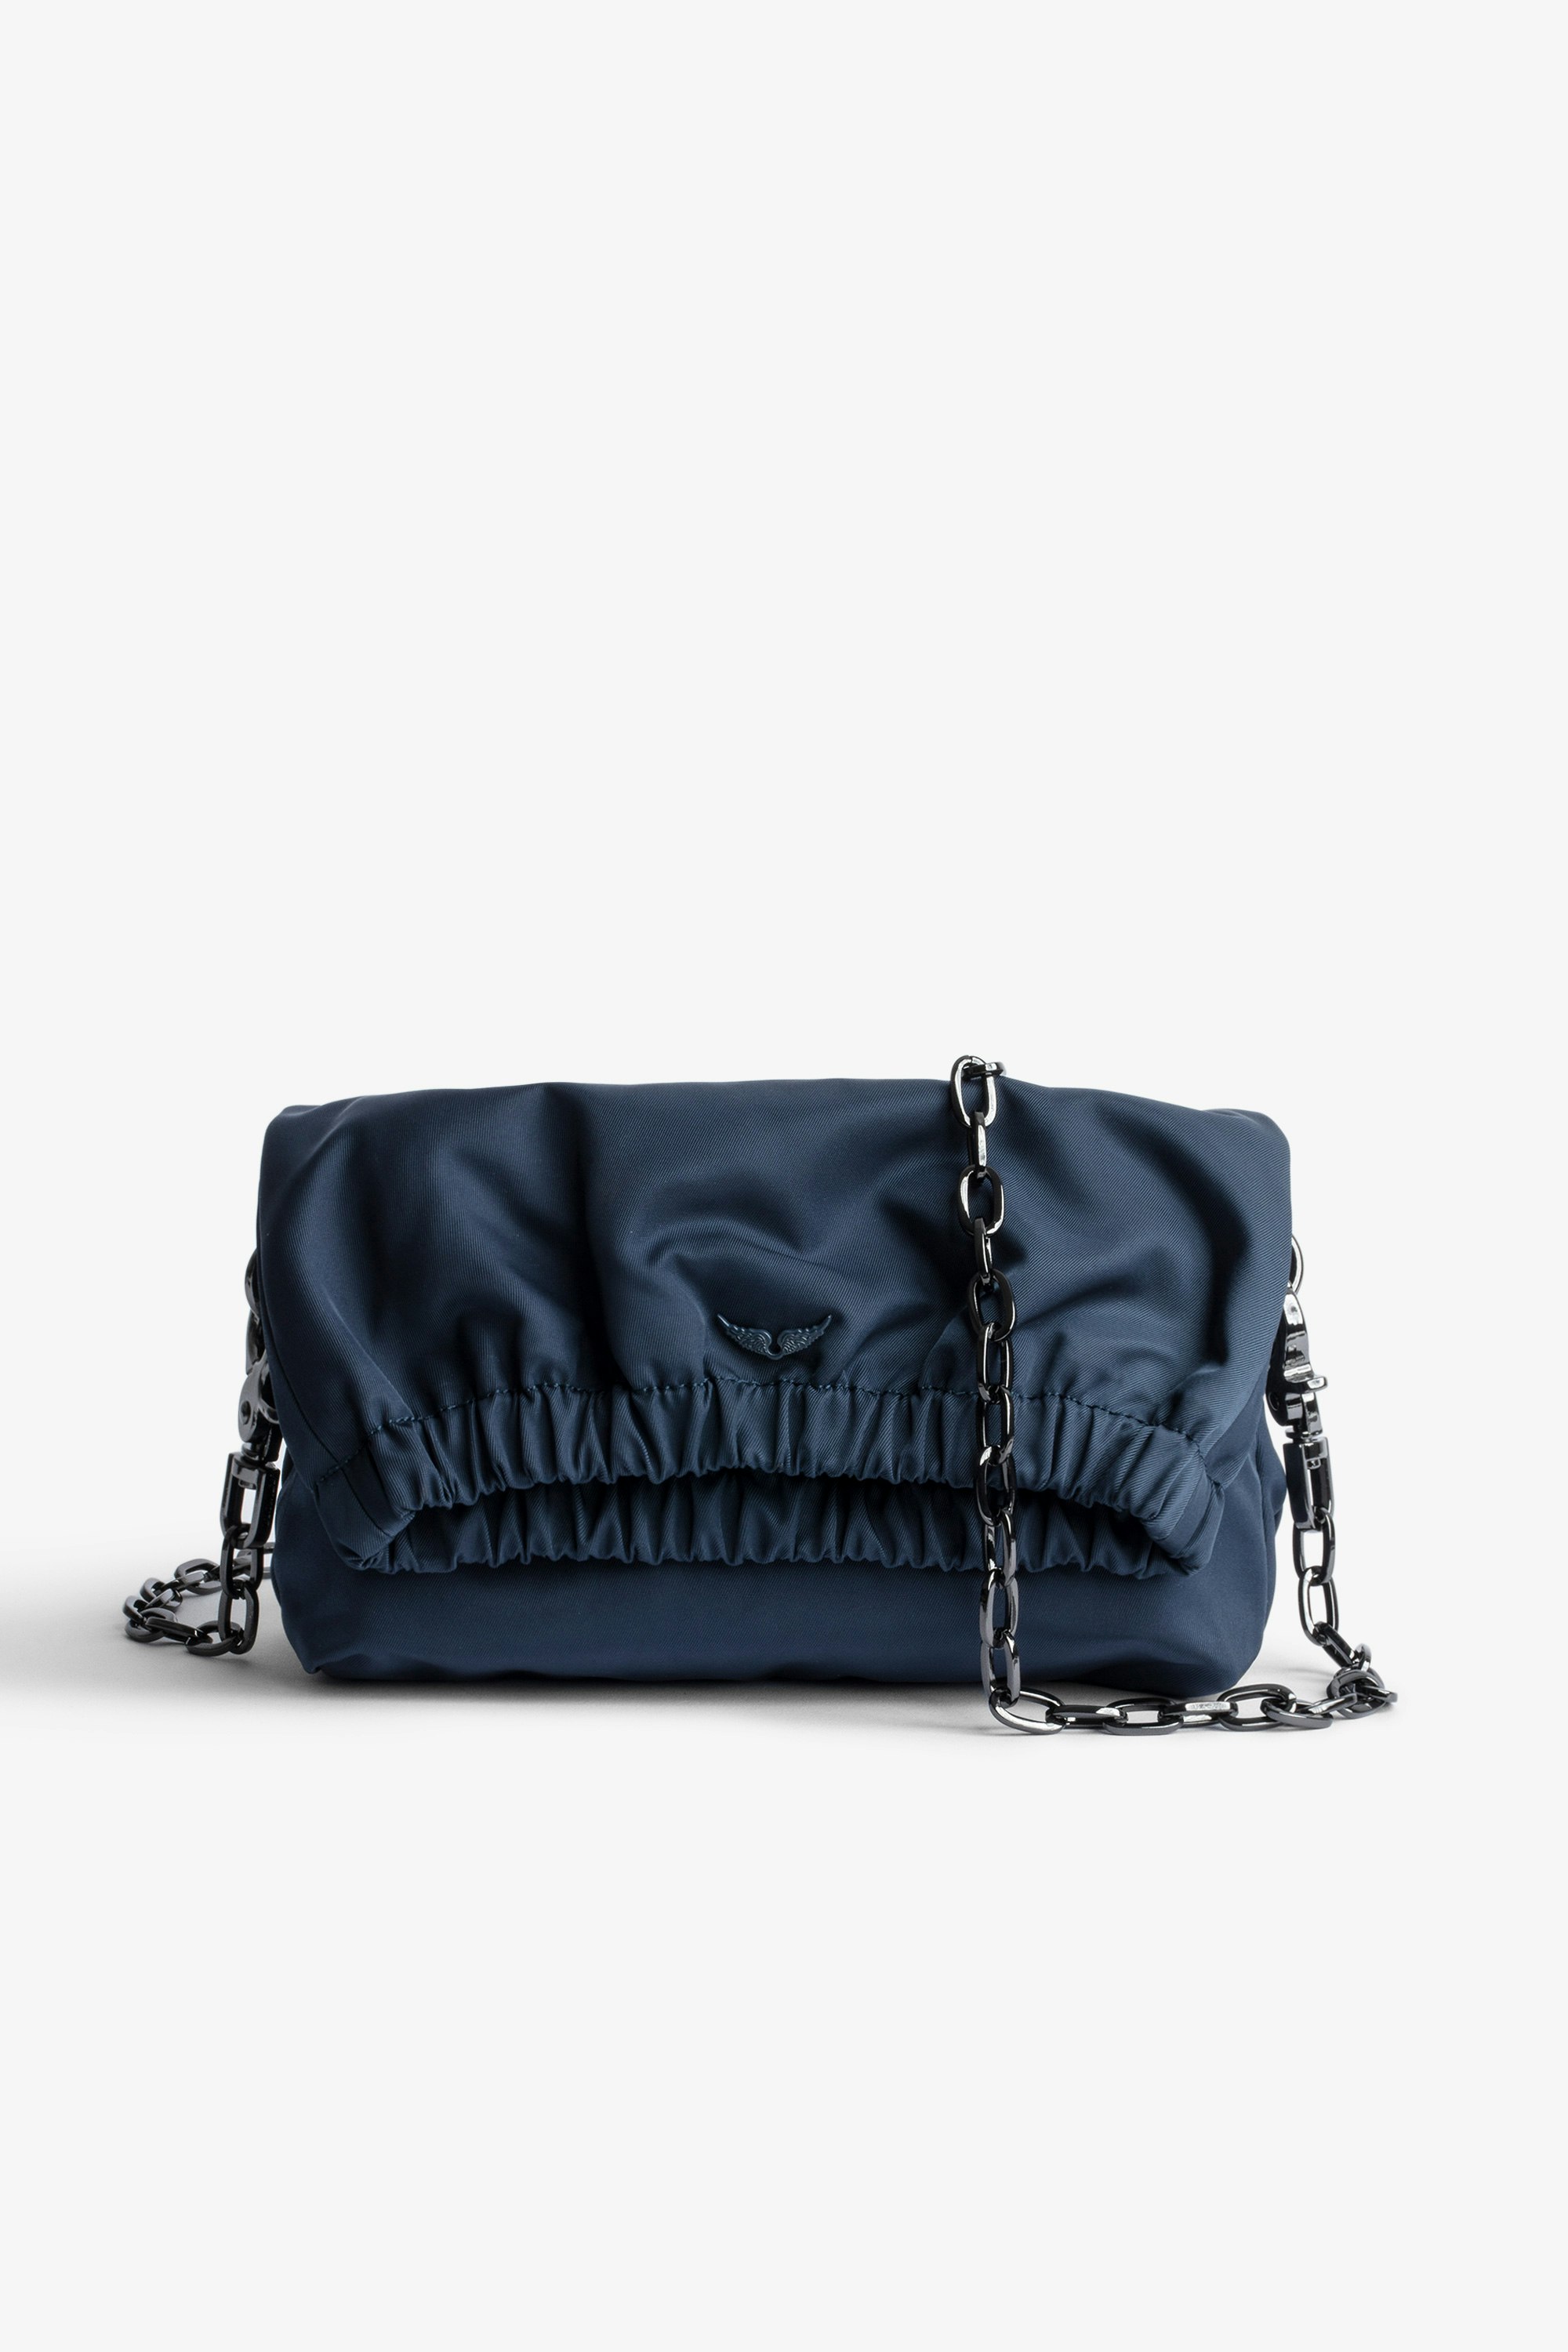 Rockyssime XS Bag Women’s small clutch bag in blue nylon with metal chain